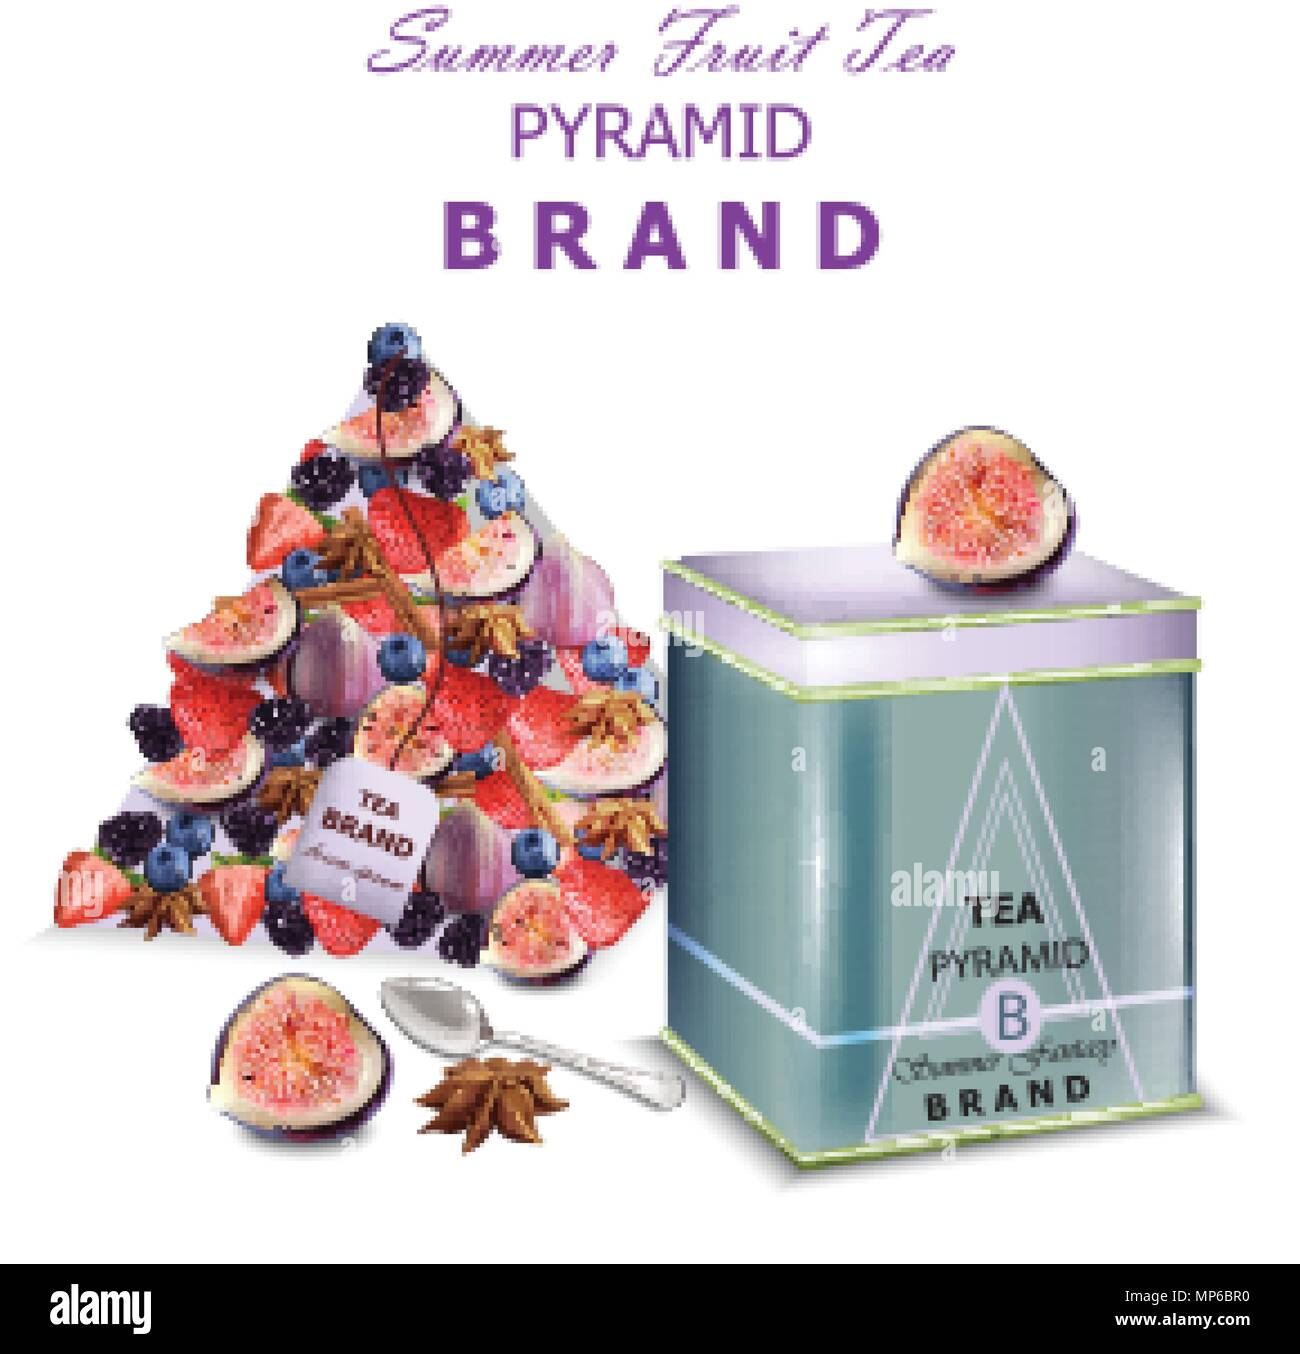 https://c8.alamy.com/comp/MP6BR0/fruits-tea-vector-realistic-packaging-pyramid-design-fresh-fruits-mixes-fig-fruit-and-blueberry-MP6BR0.jpg